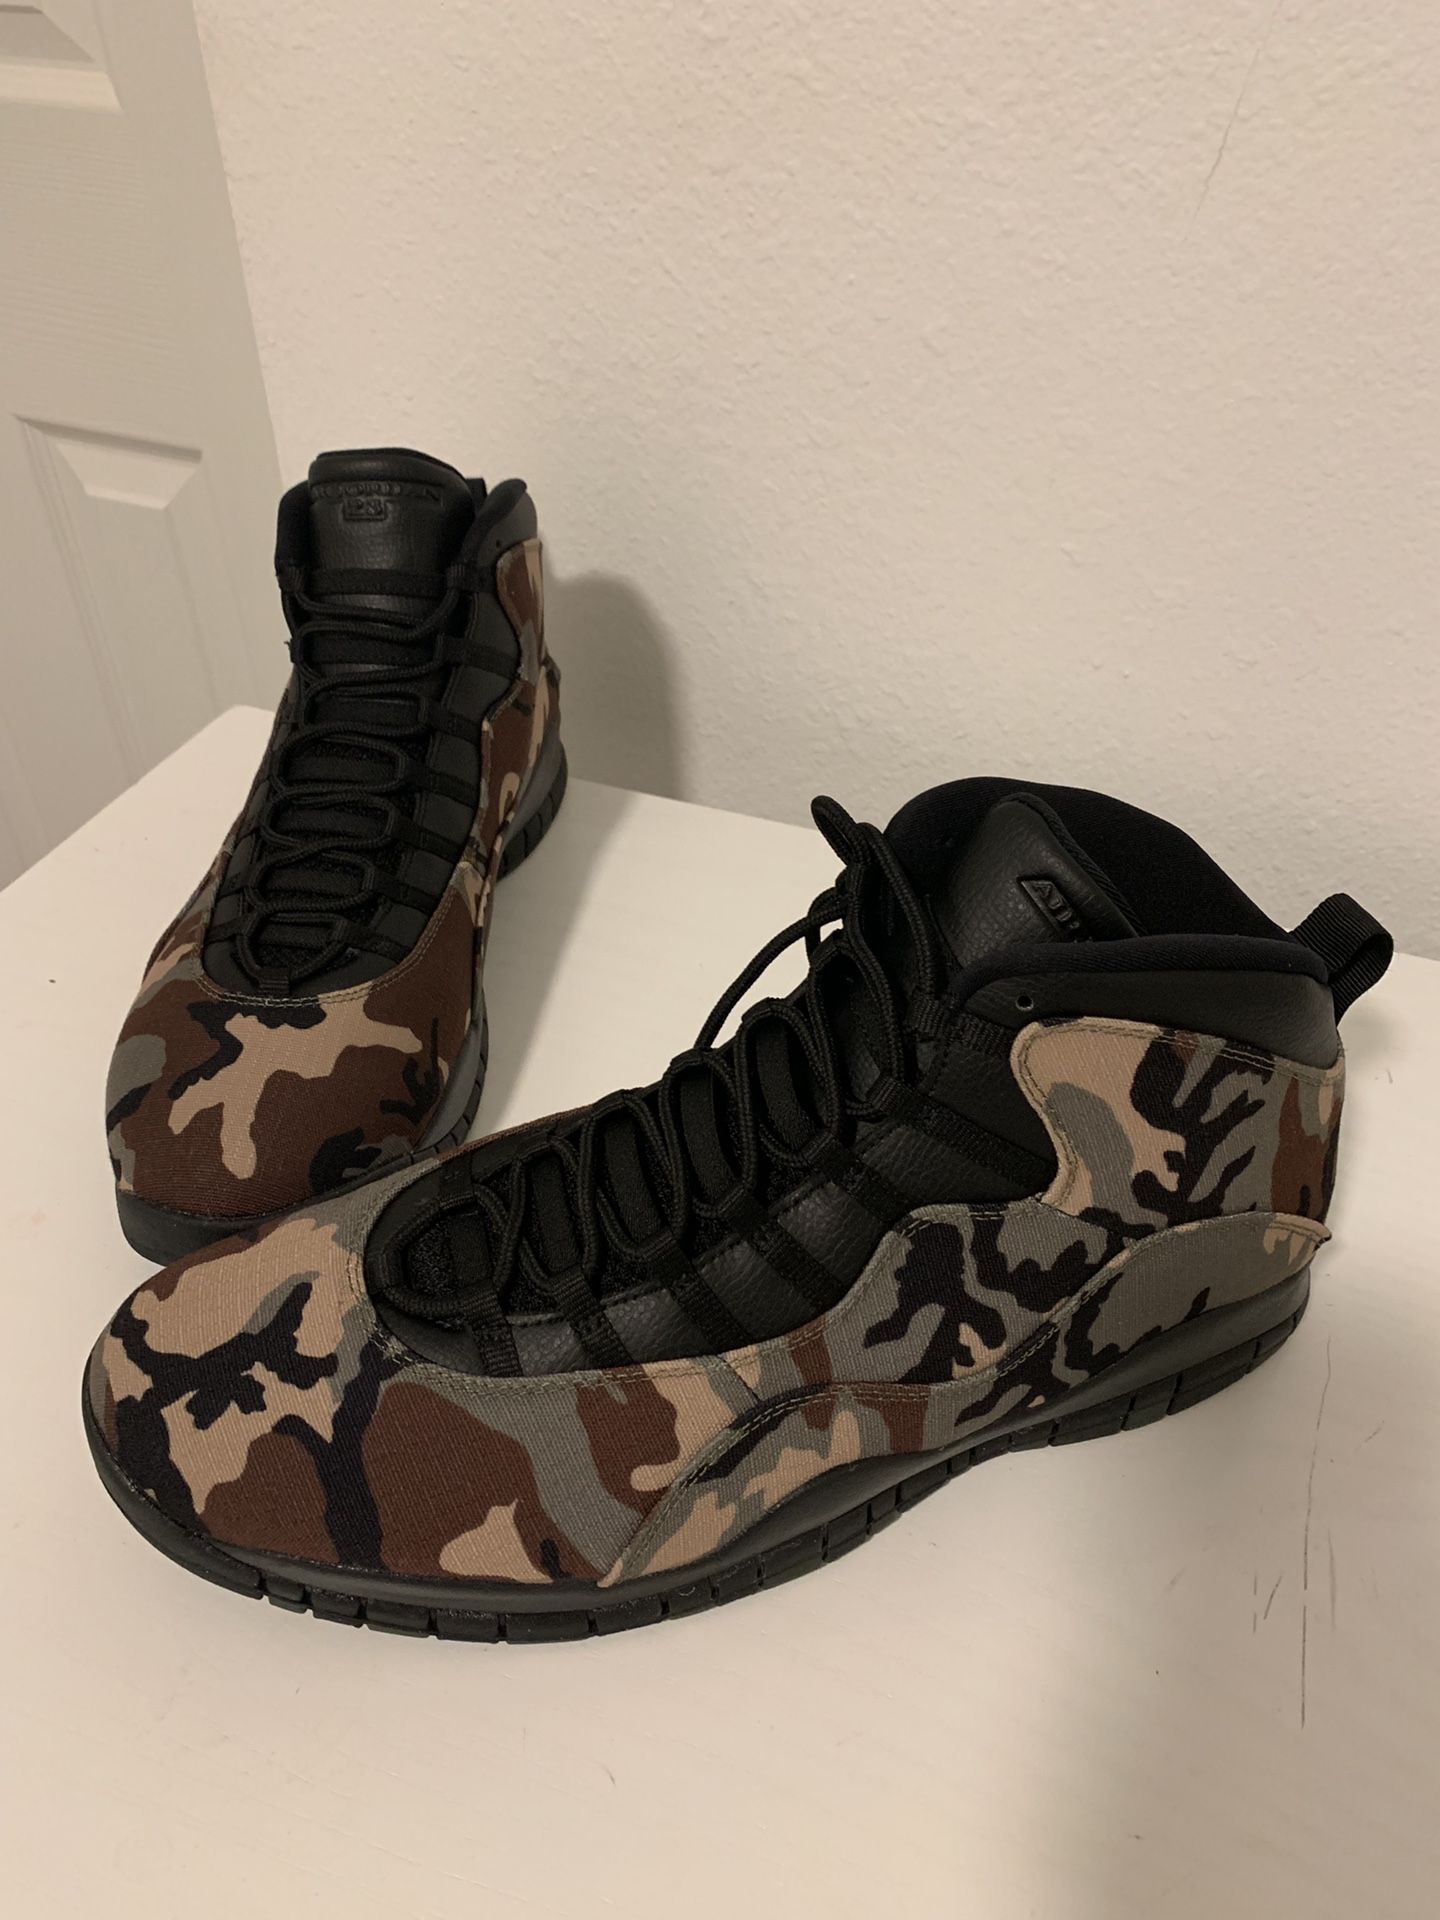 Newly Released Air Jordan 10 Woodland Camo. Rare Size 18. Open to Offers